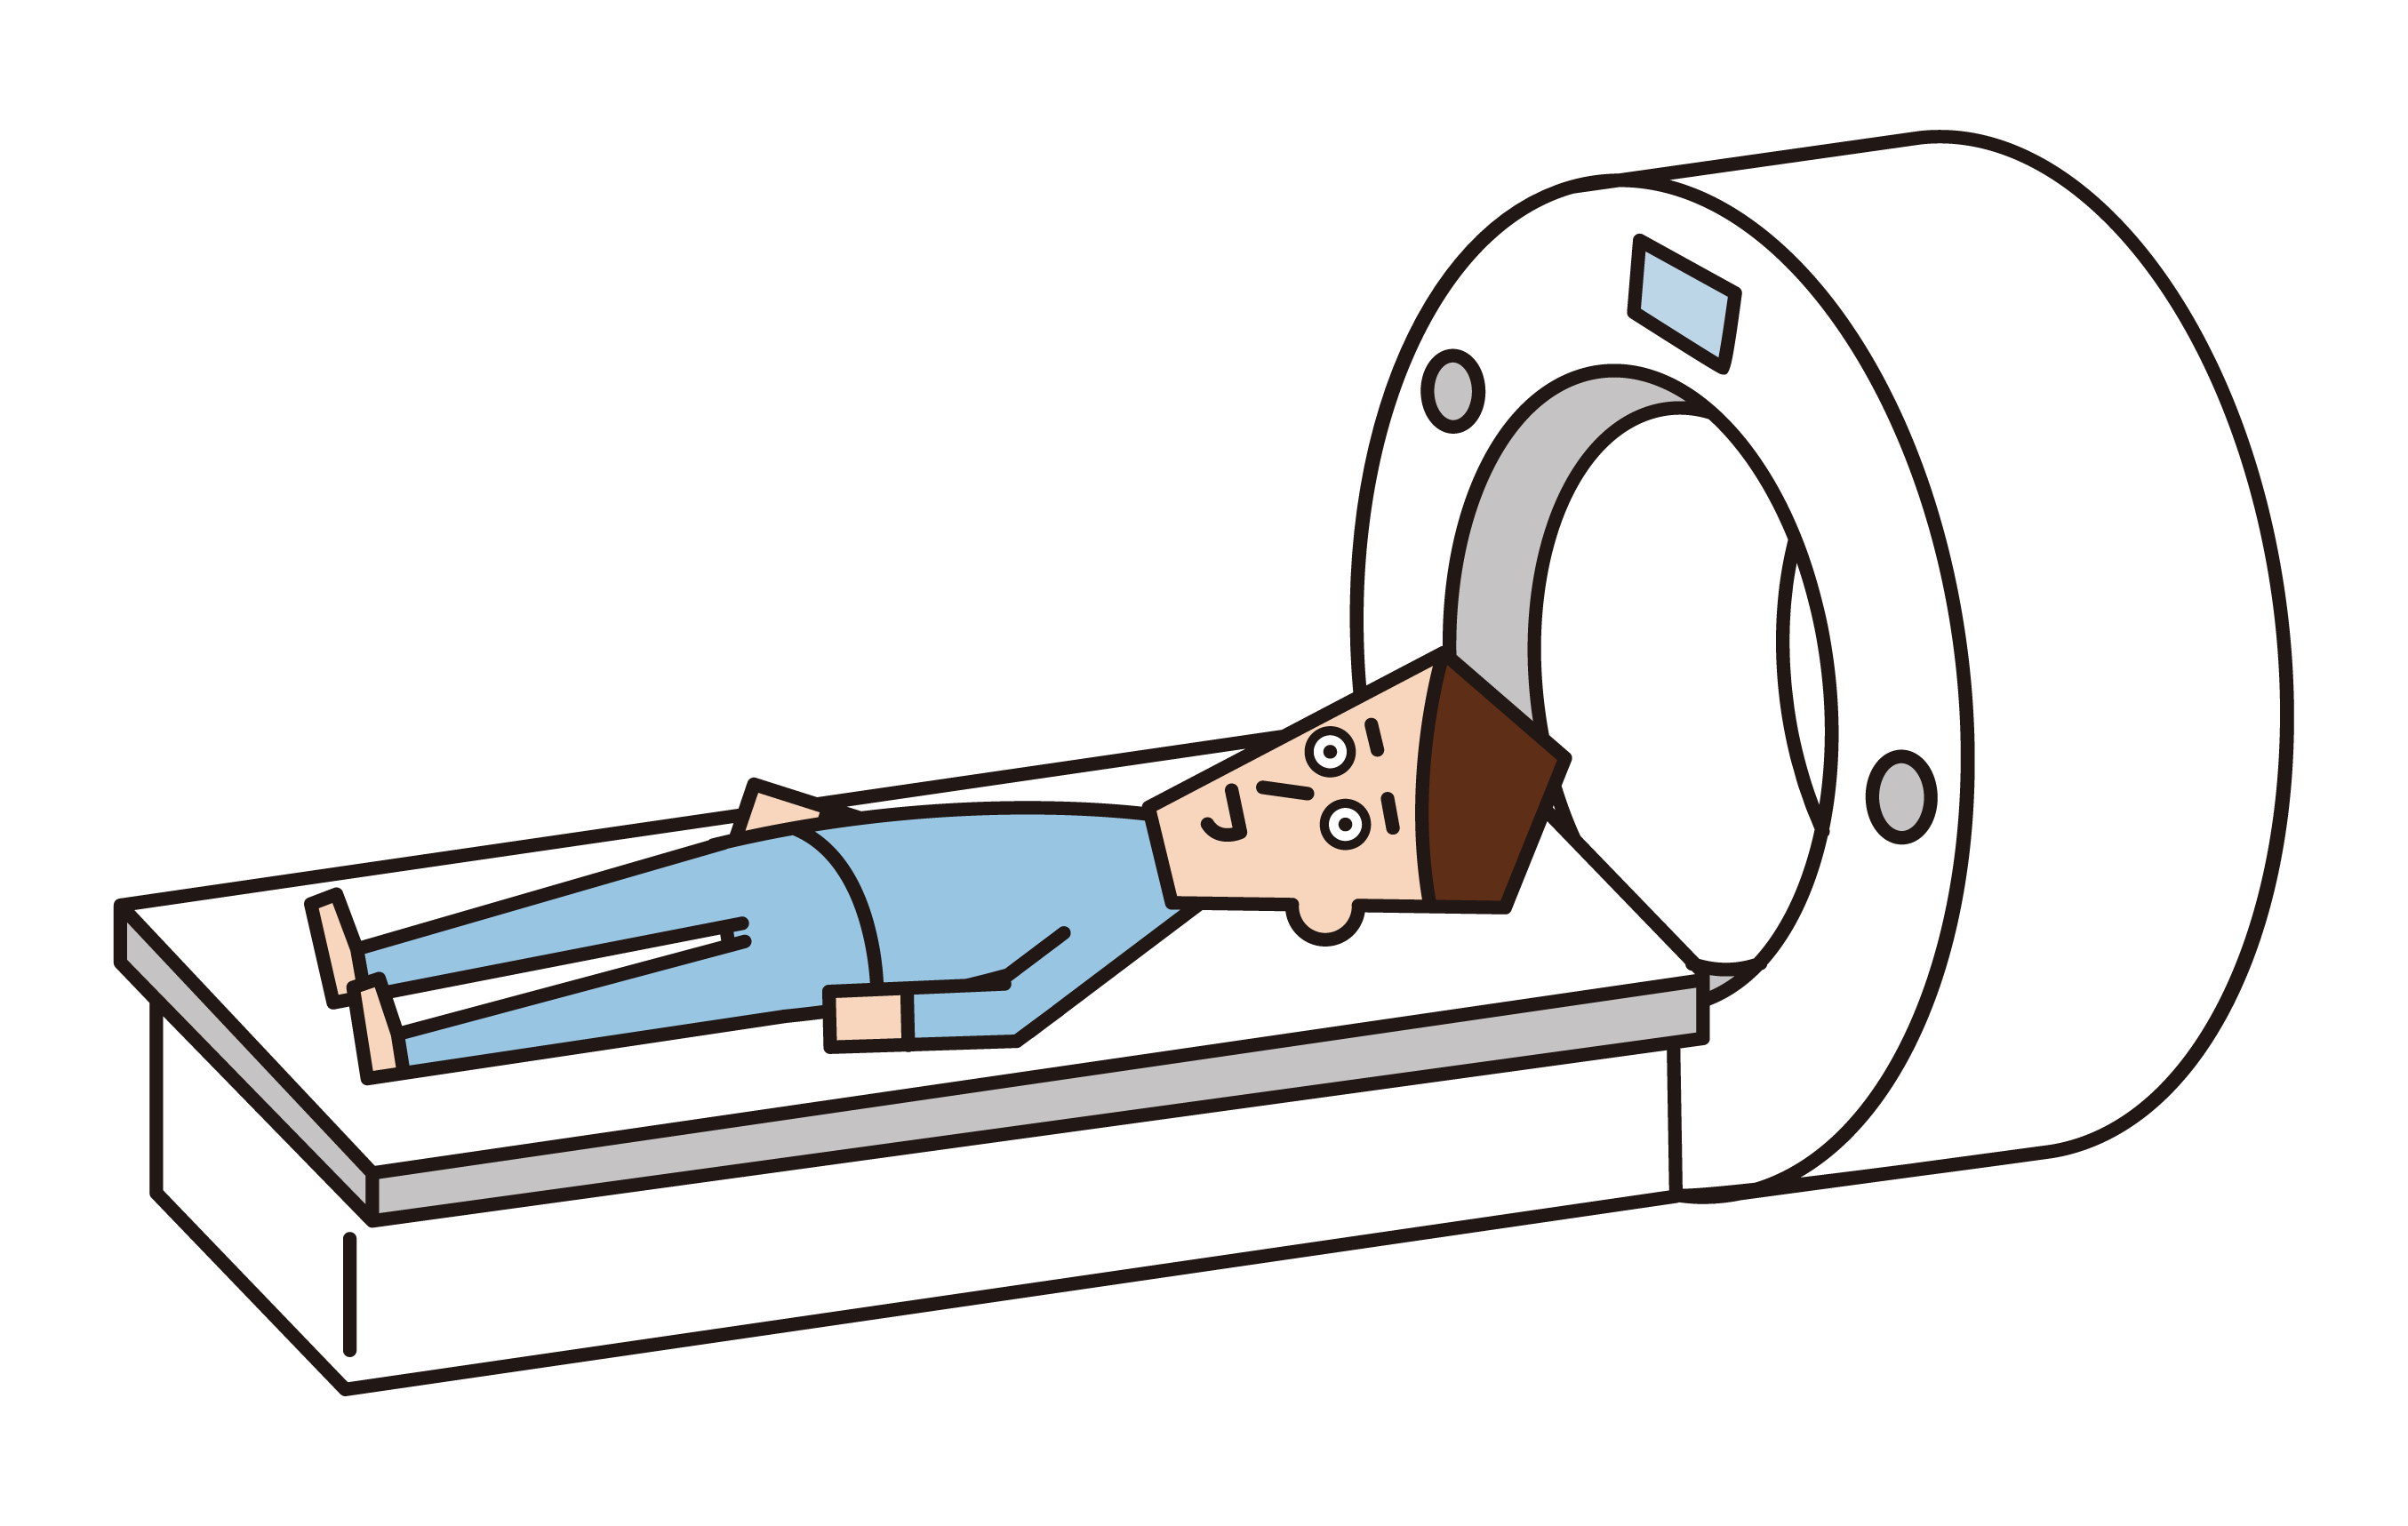 Illustration of a woman who underwent an MRI examination